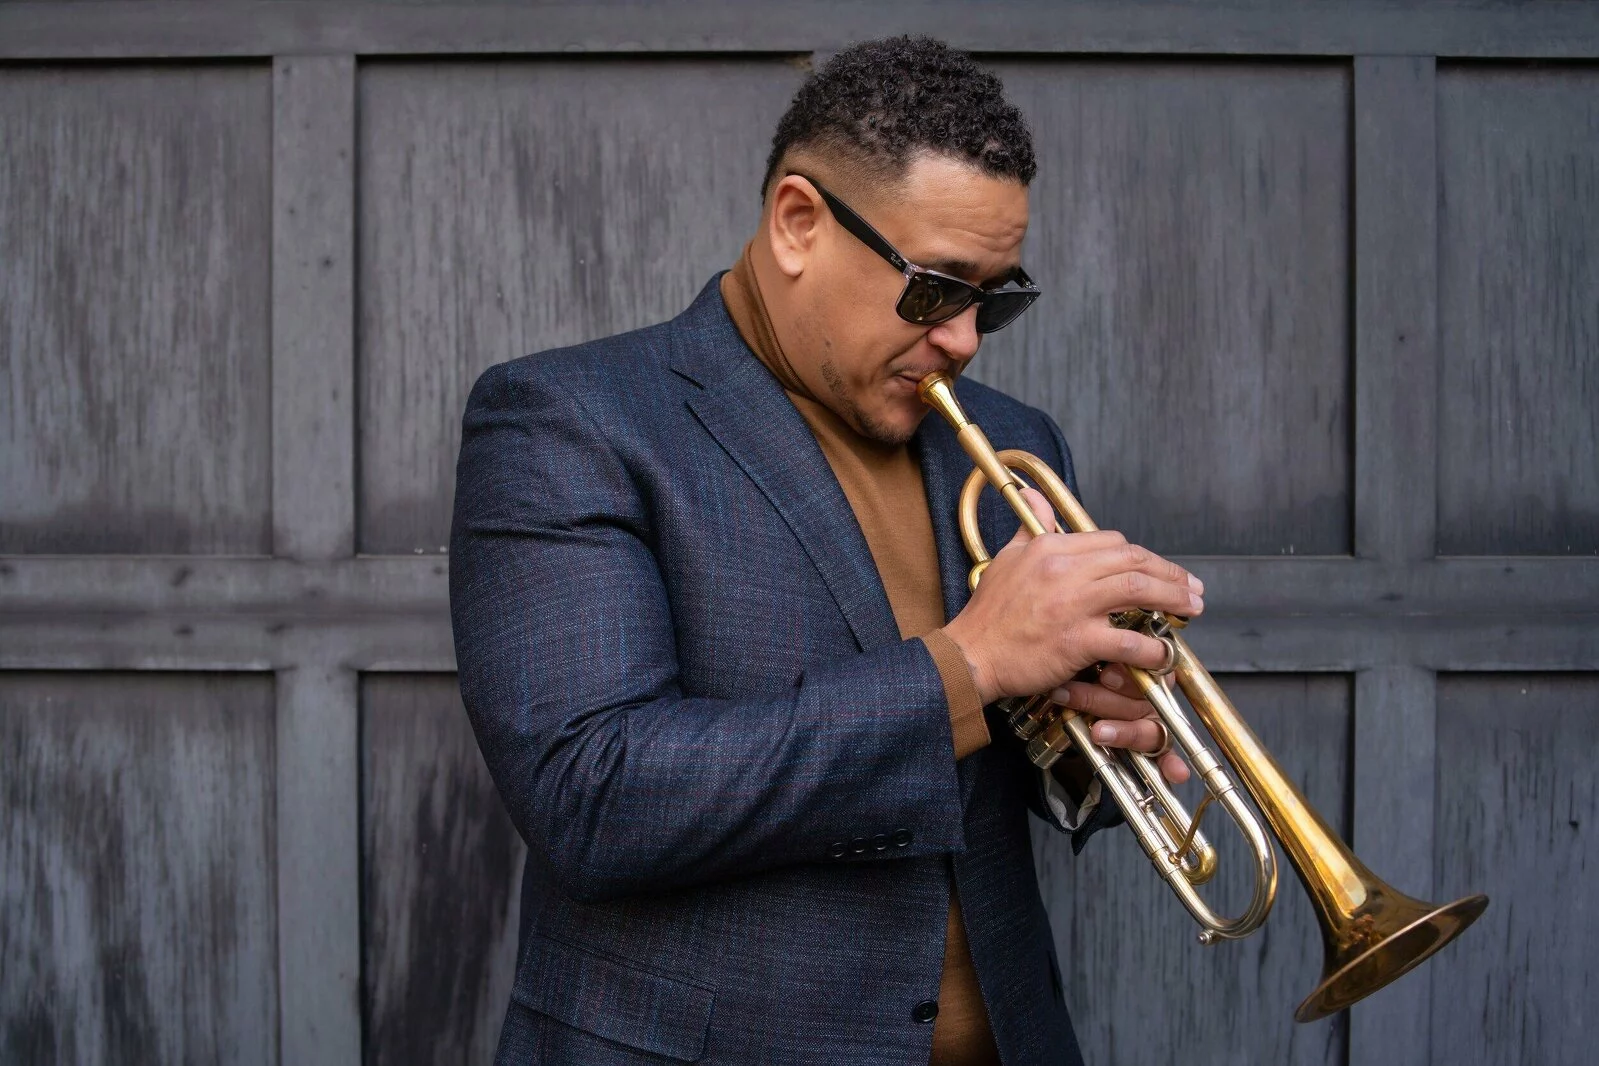 A Black man with dark glasses in a blue blazer blows into a trumpet.